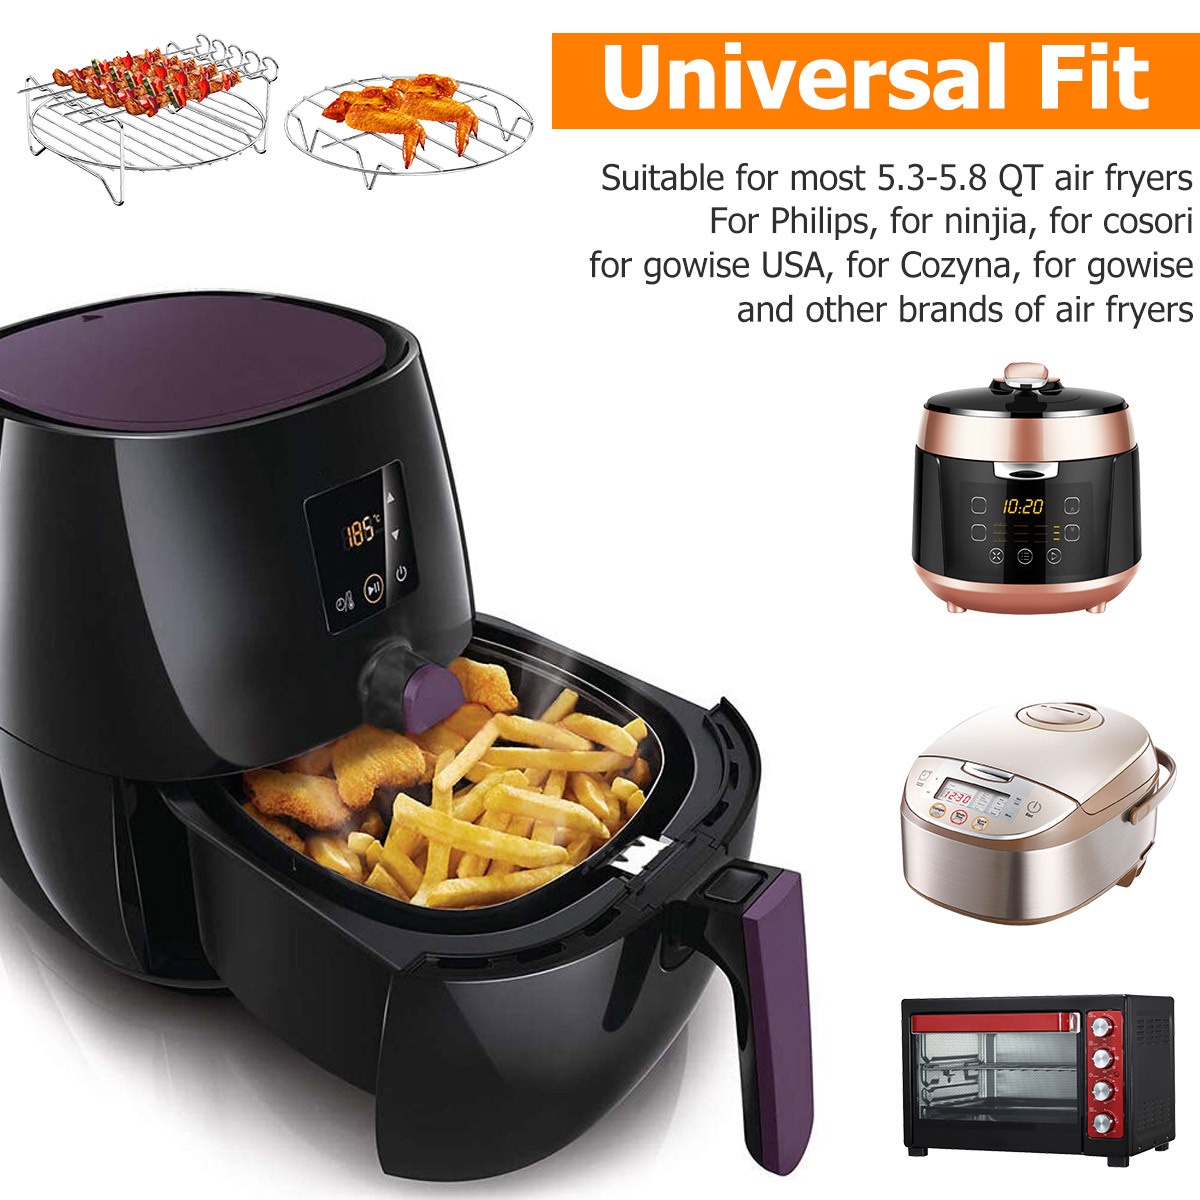 Air Fryer Accessories,Phillips Air Fryer Accessories and GoWISE Air Fryer Fit of